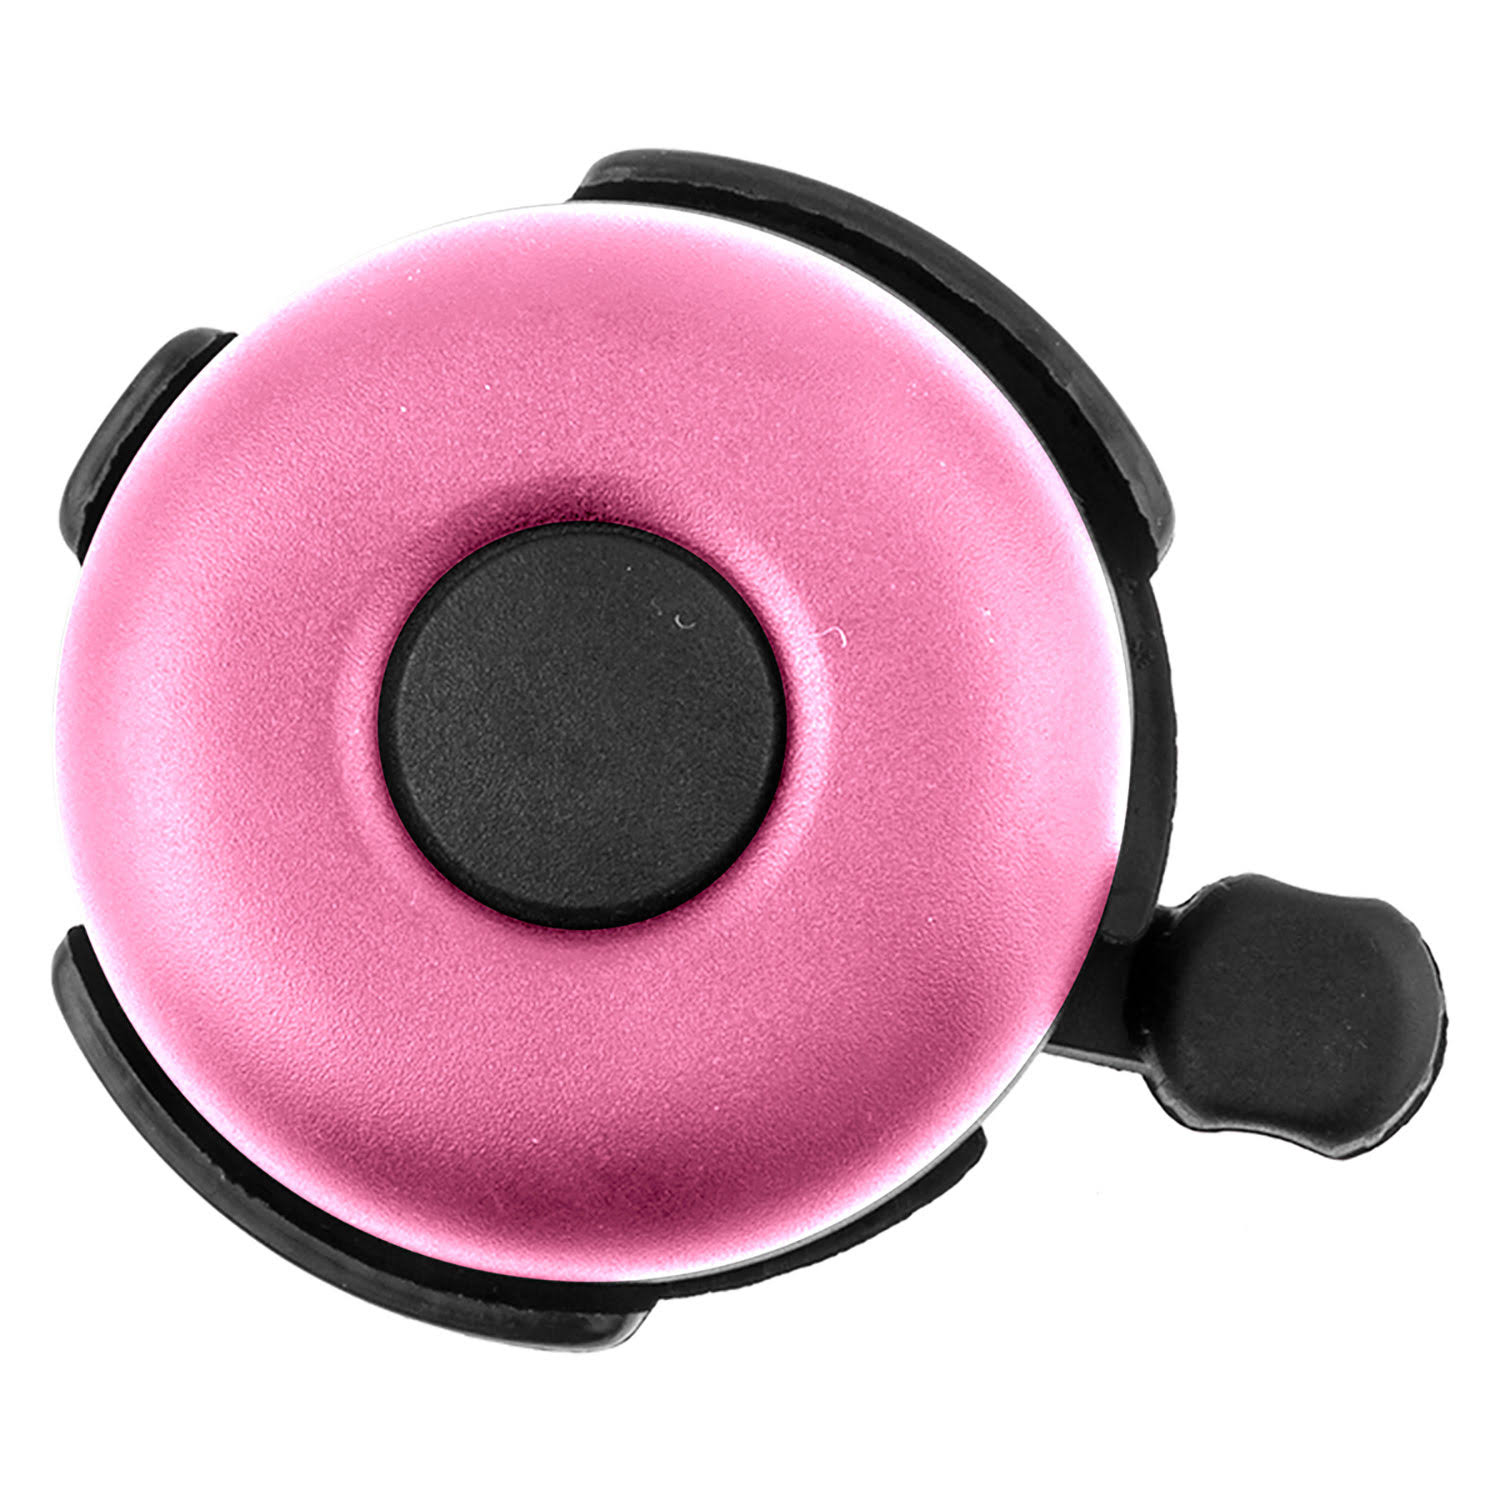 Bicycle Riding Handlebar Bell Sunlite Ringer - Pink, 53mm, Alloy